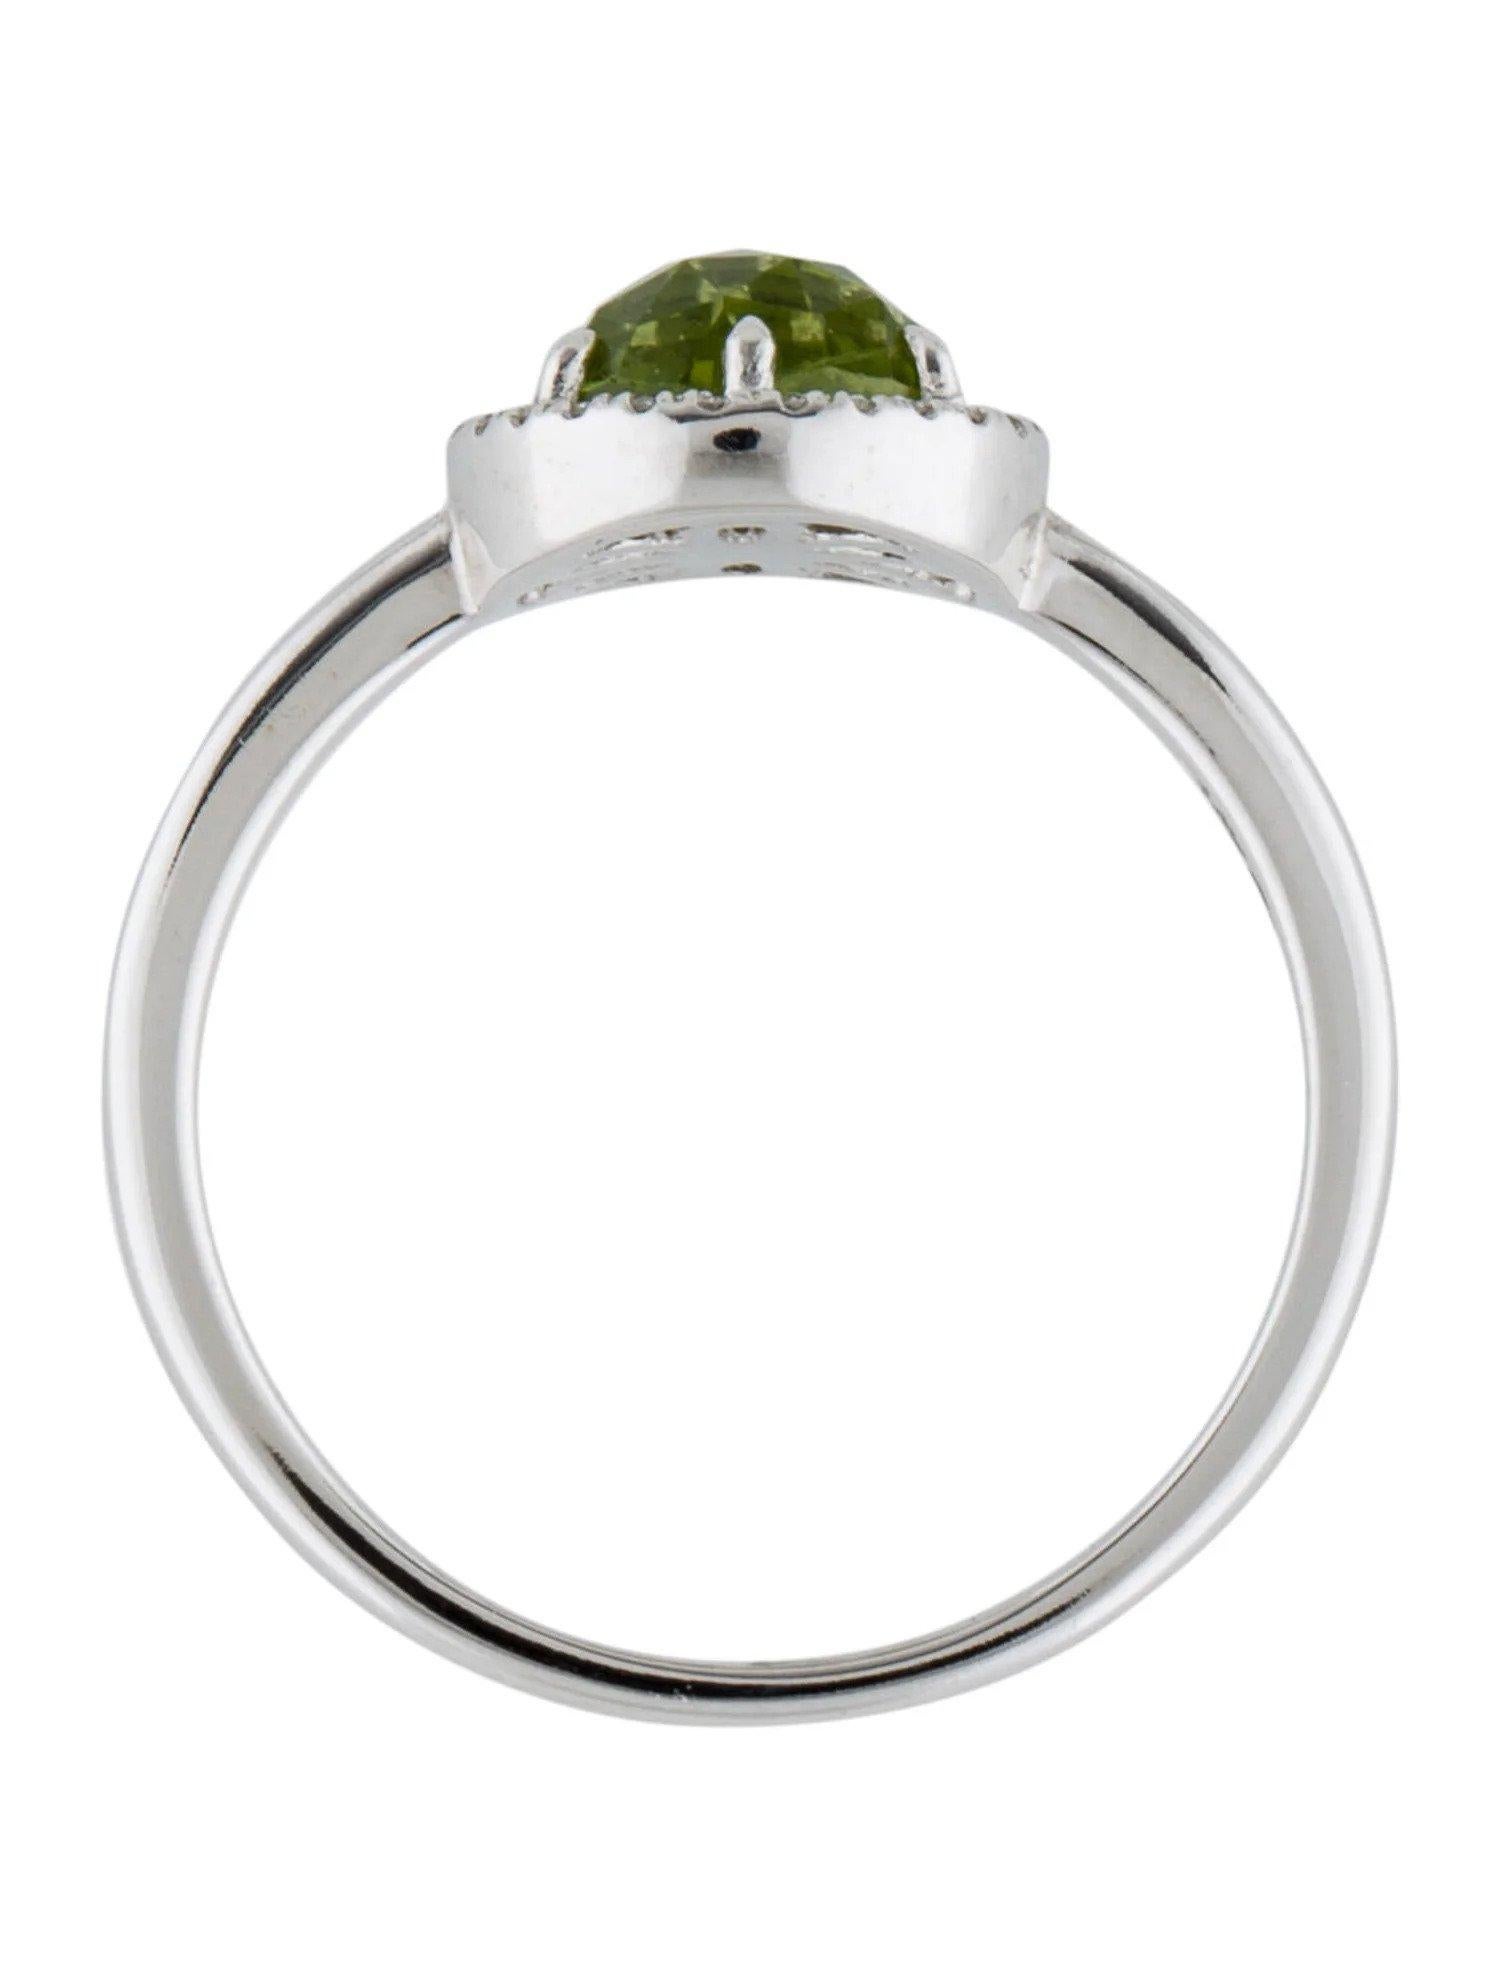 1.31 Carat Round Peridot & Diamond White Gold Ring In New Condition For Sale In Great Neck, NY